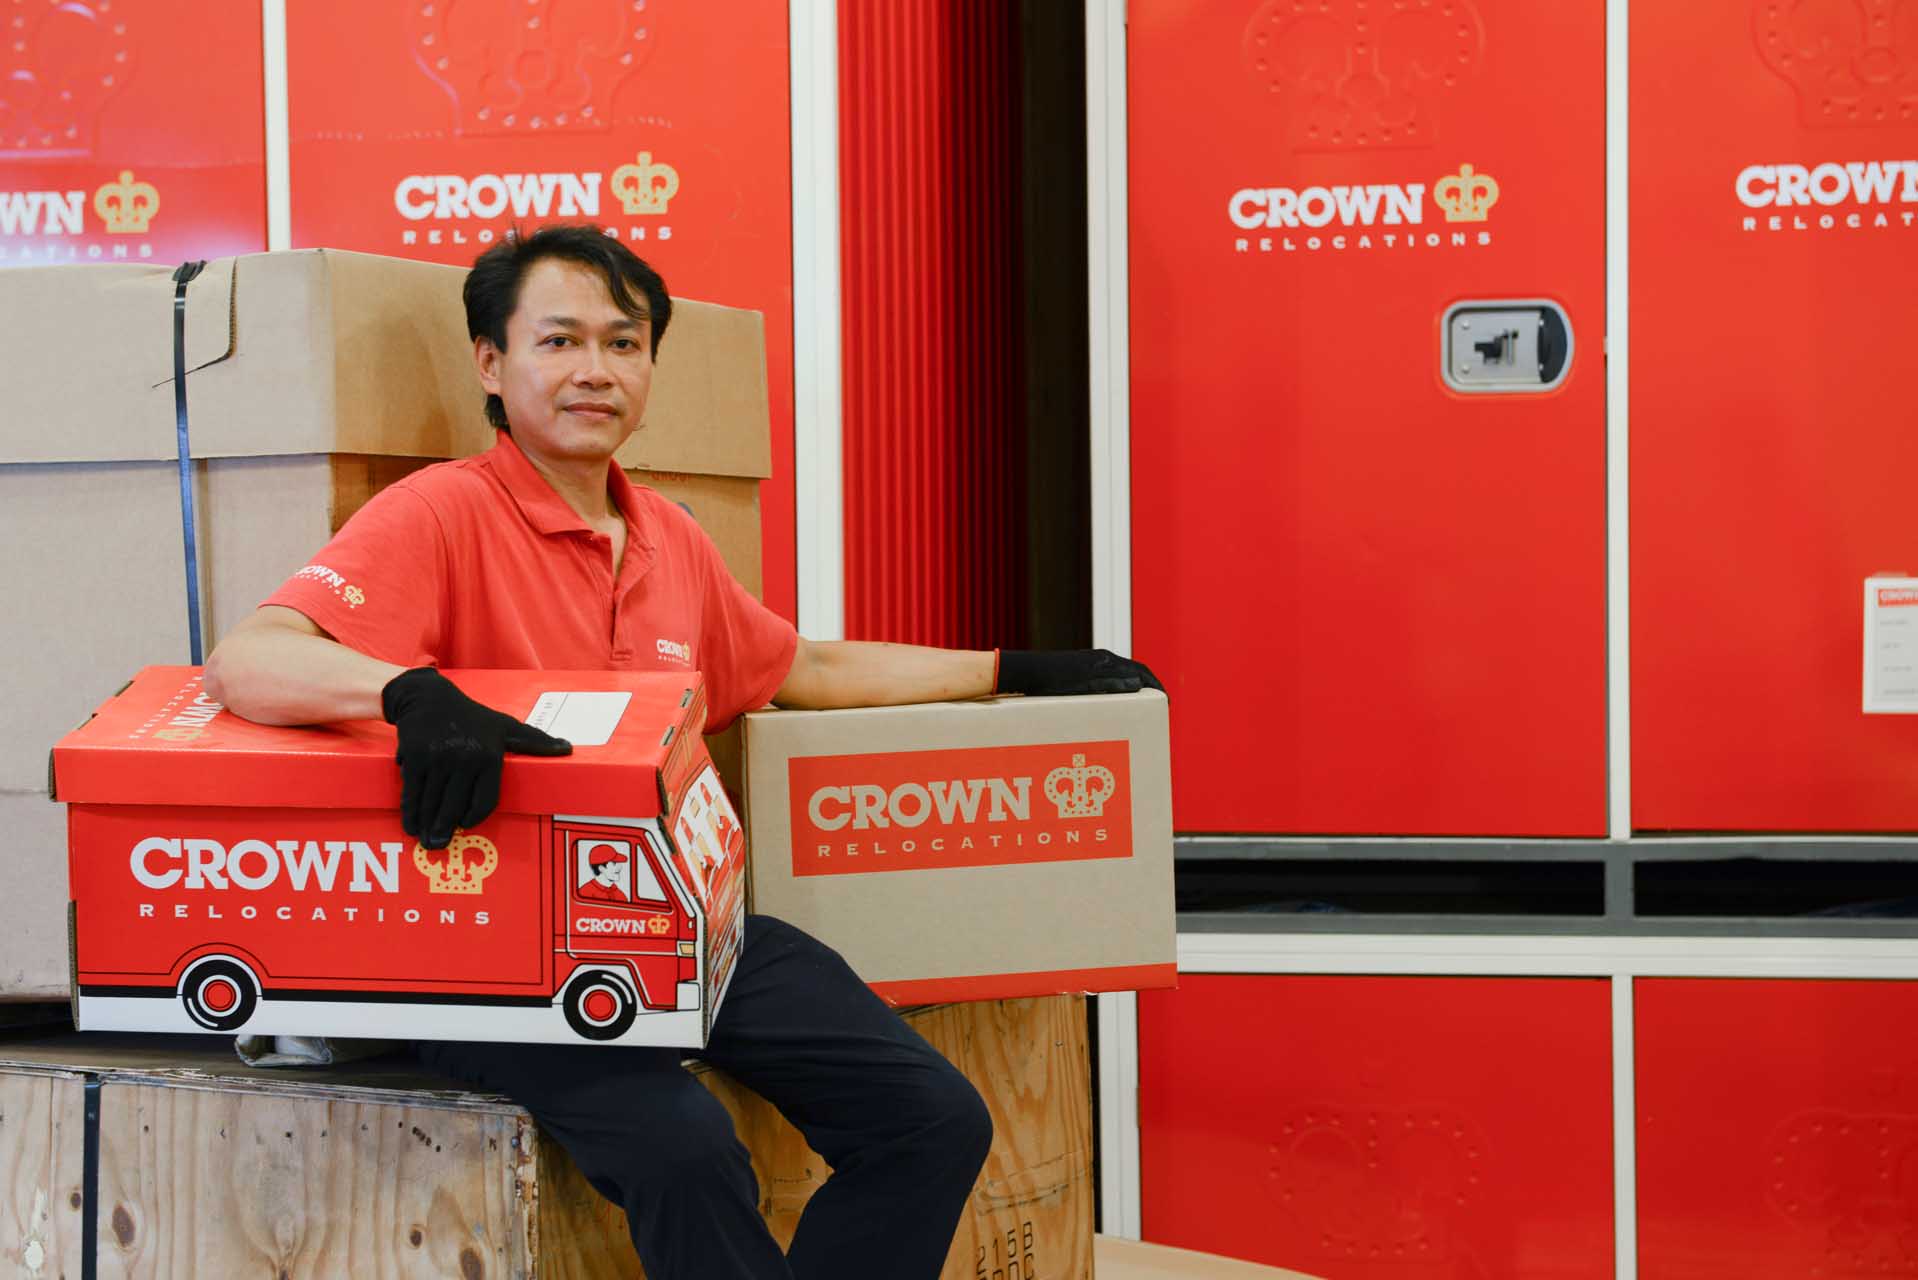 Crown Relocations secure storage